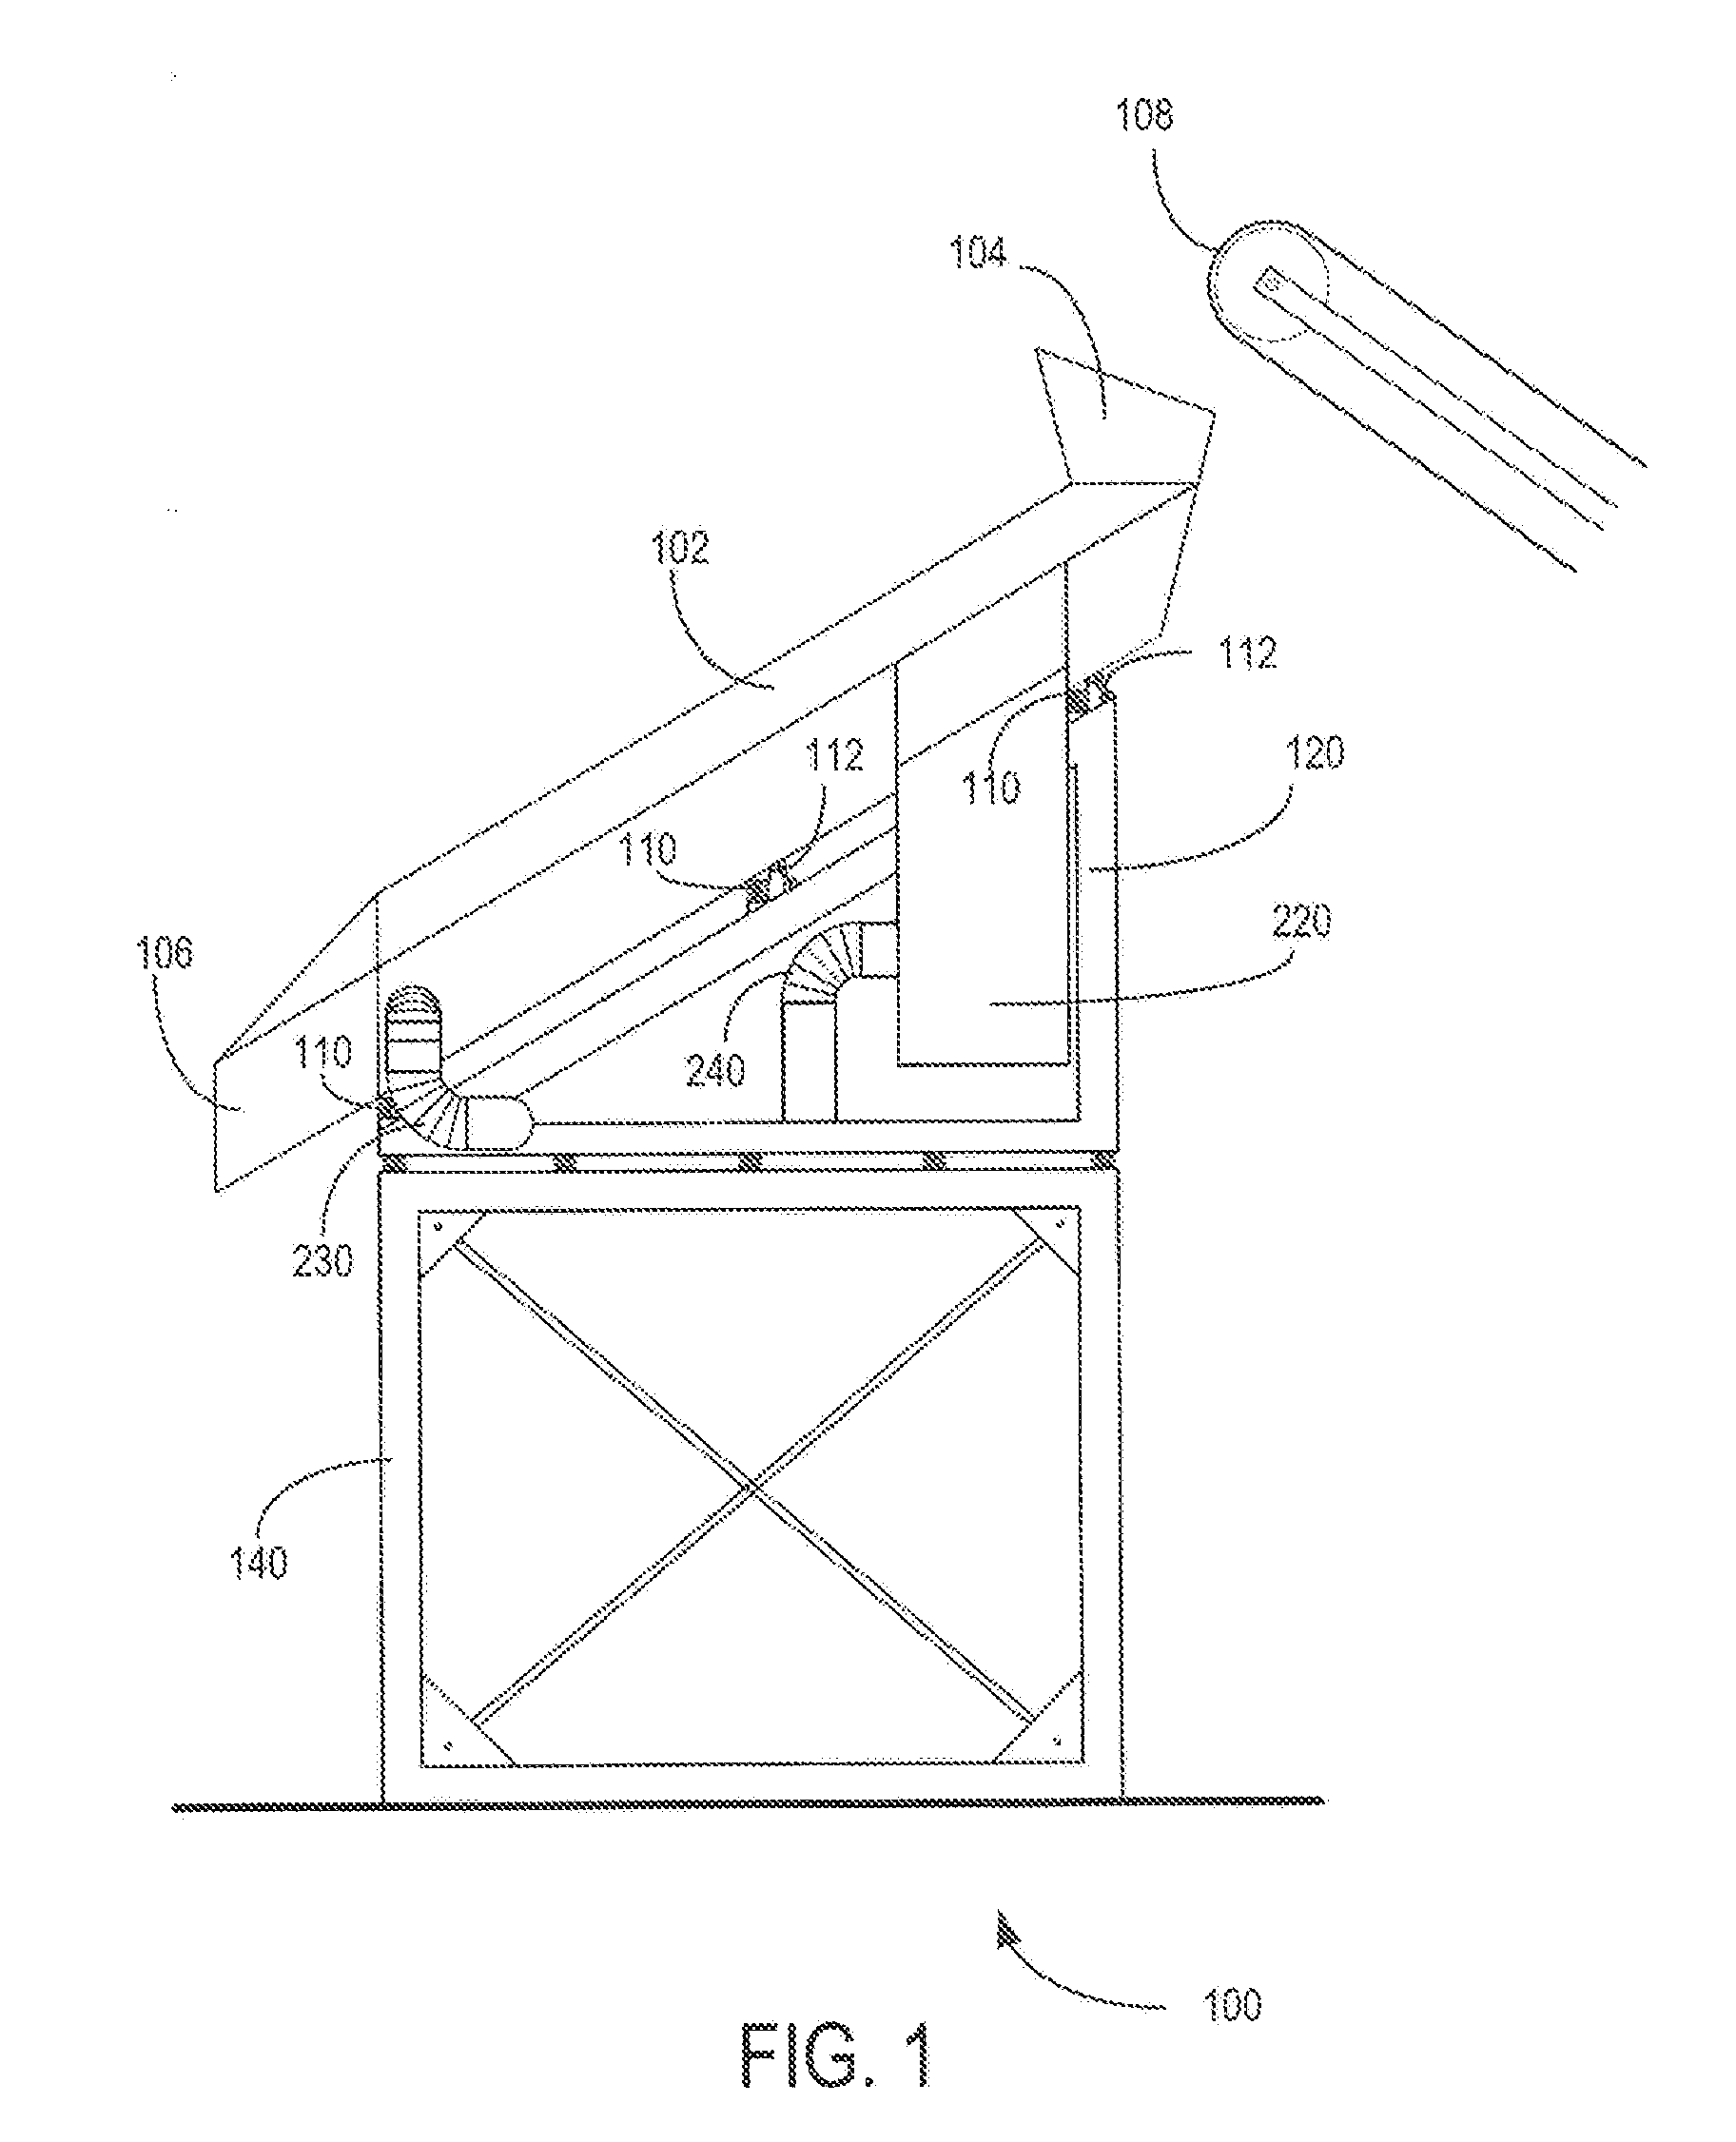 Method and apparatus for separating plastics from compost and other recyclable materials